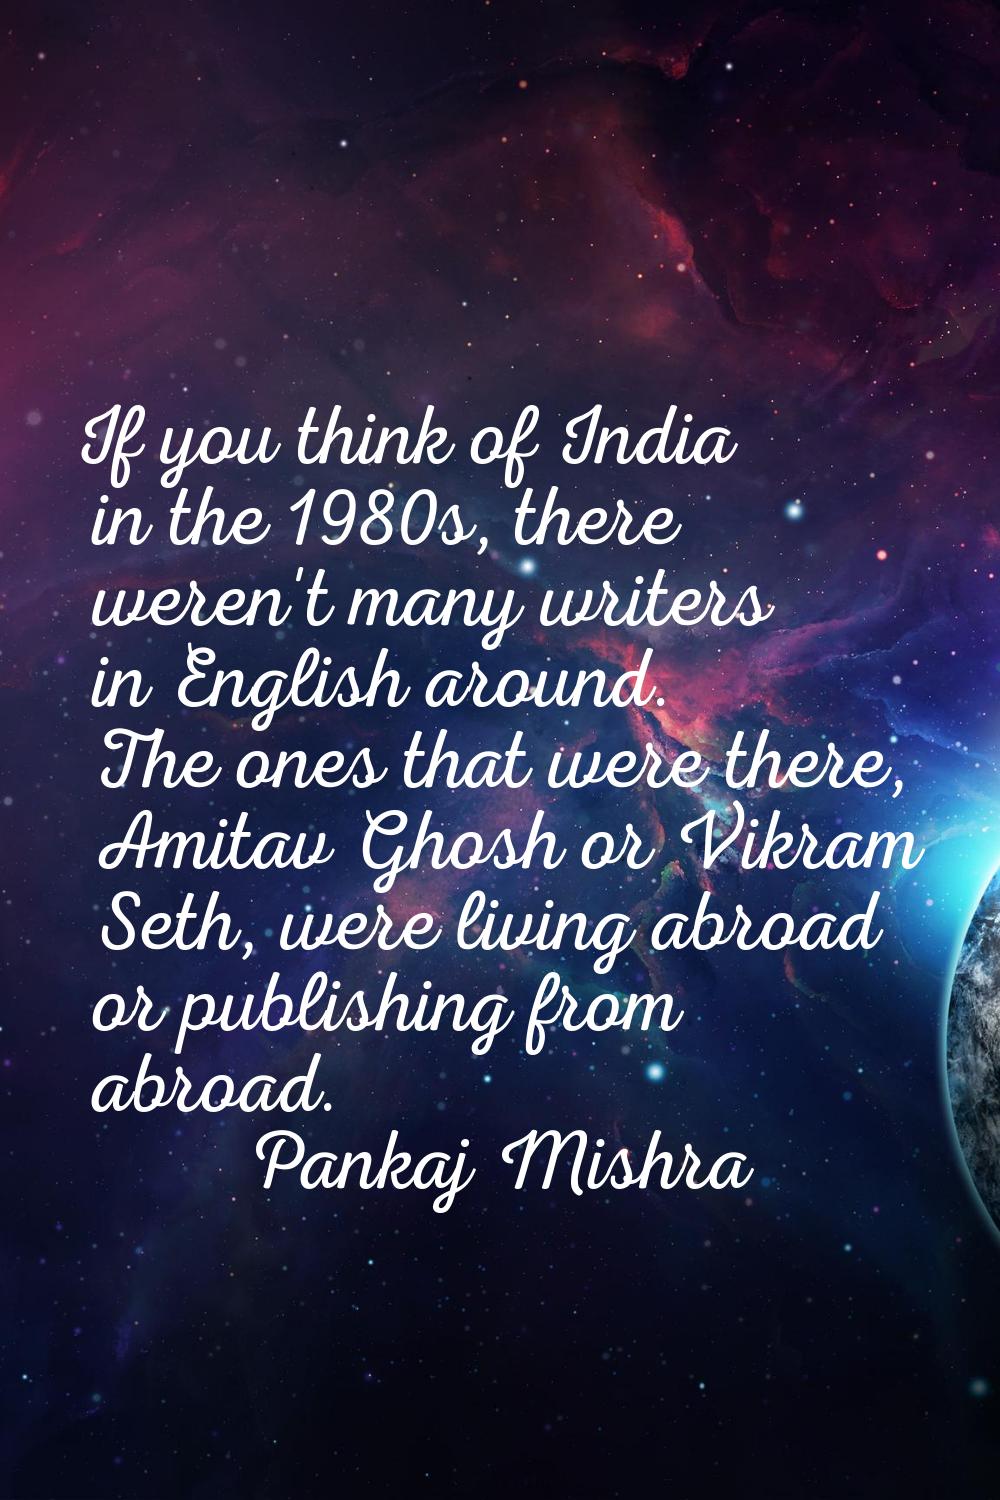 If you think of India in the 1980s, there weren't many writers in English around. The ones that wer